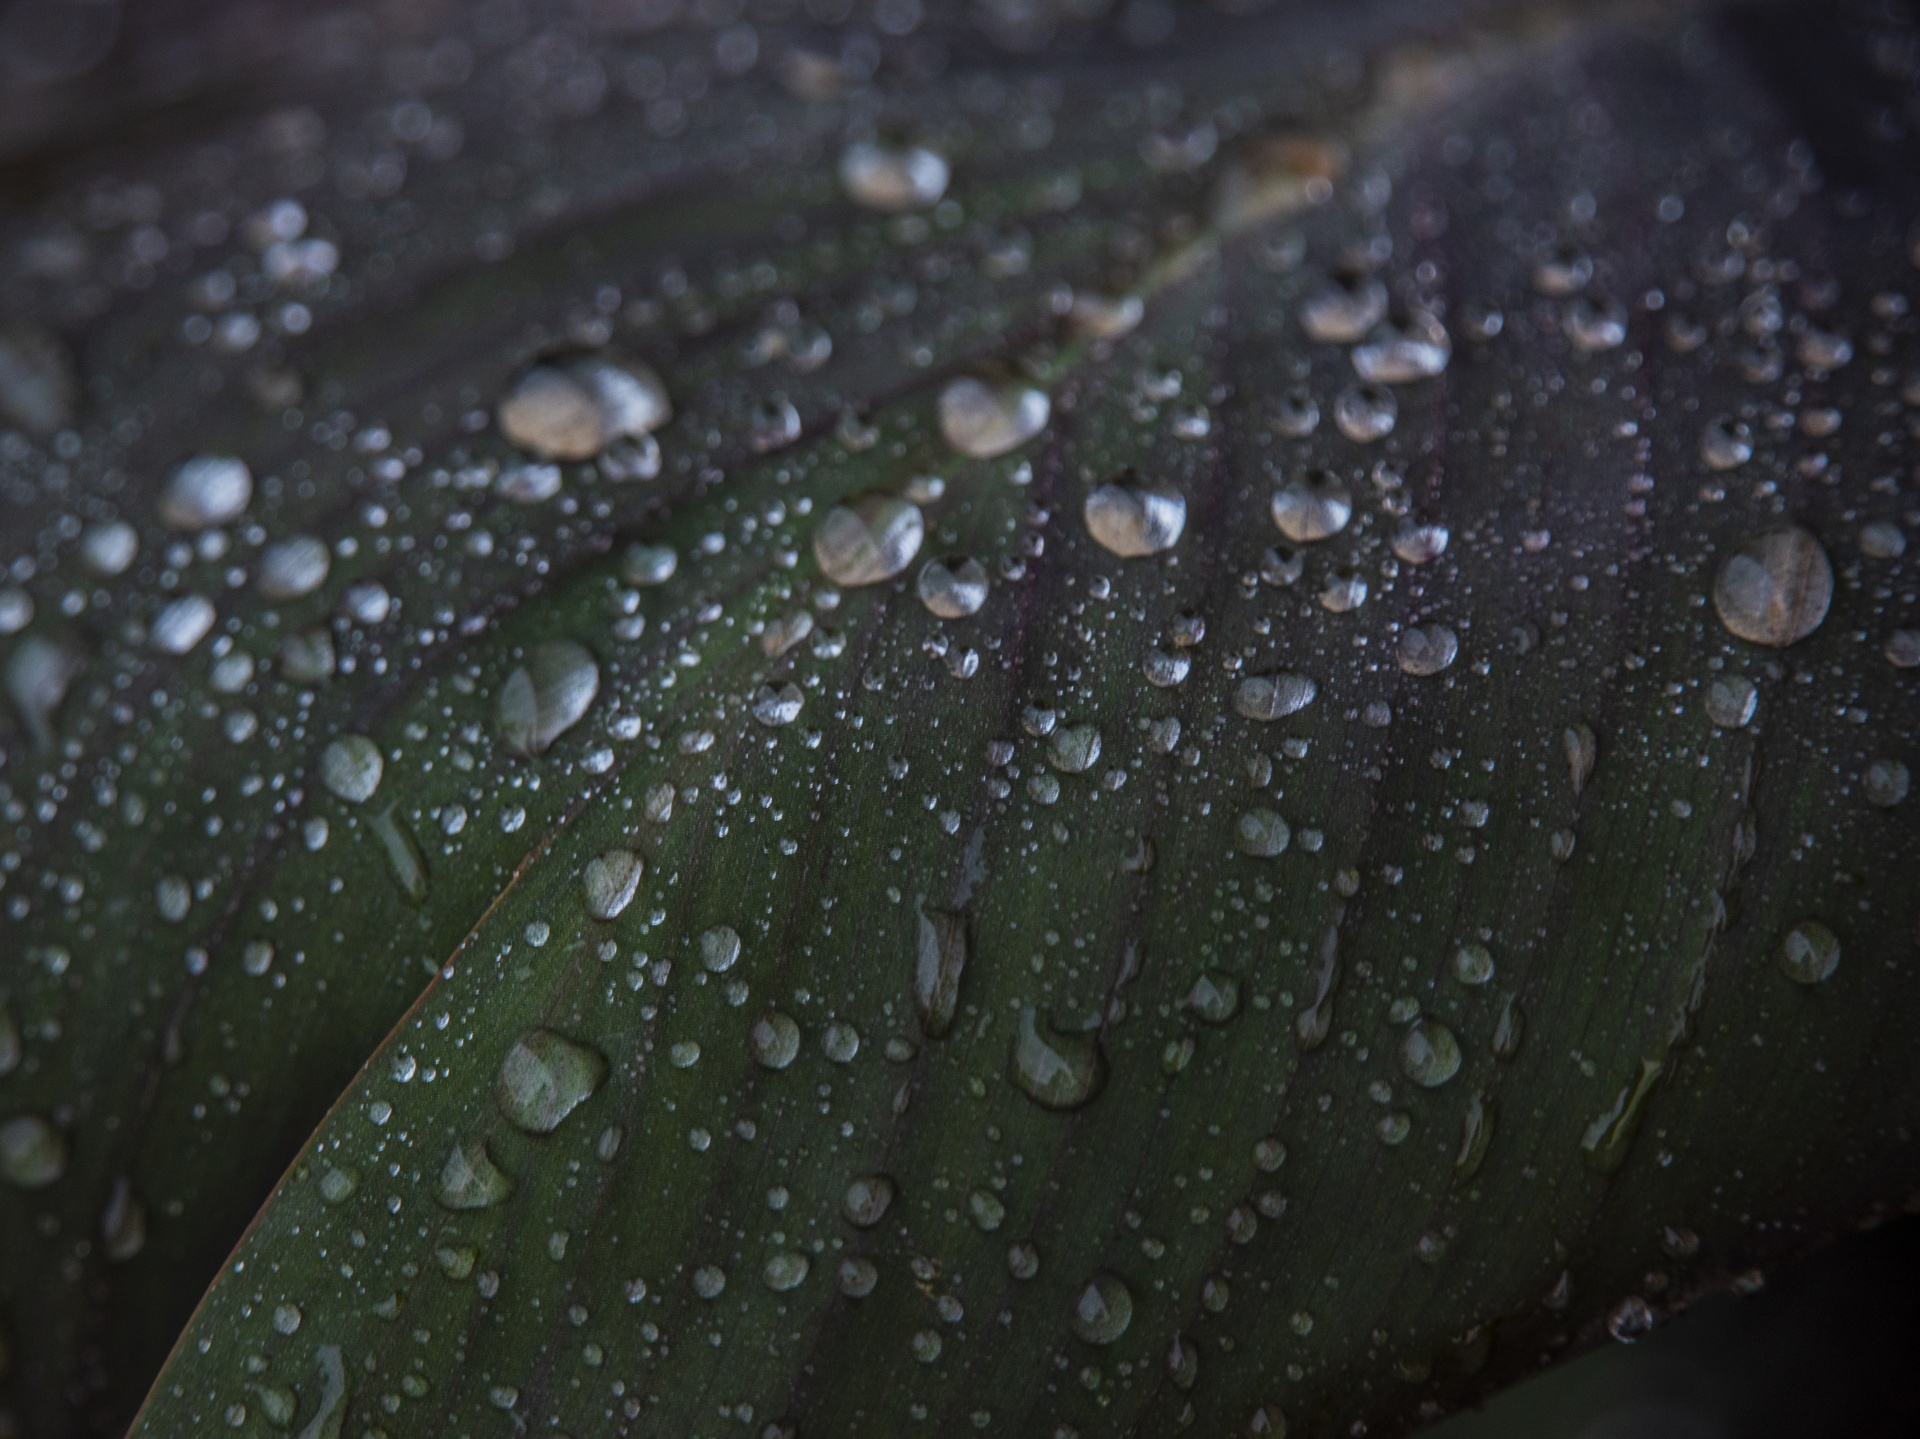 Raindrops sit on the wide stripped leaf of a Canna Lilly leaf